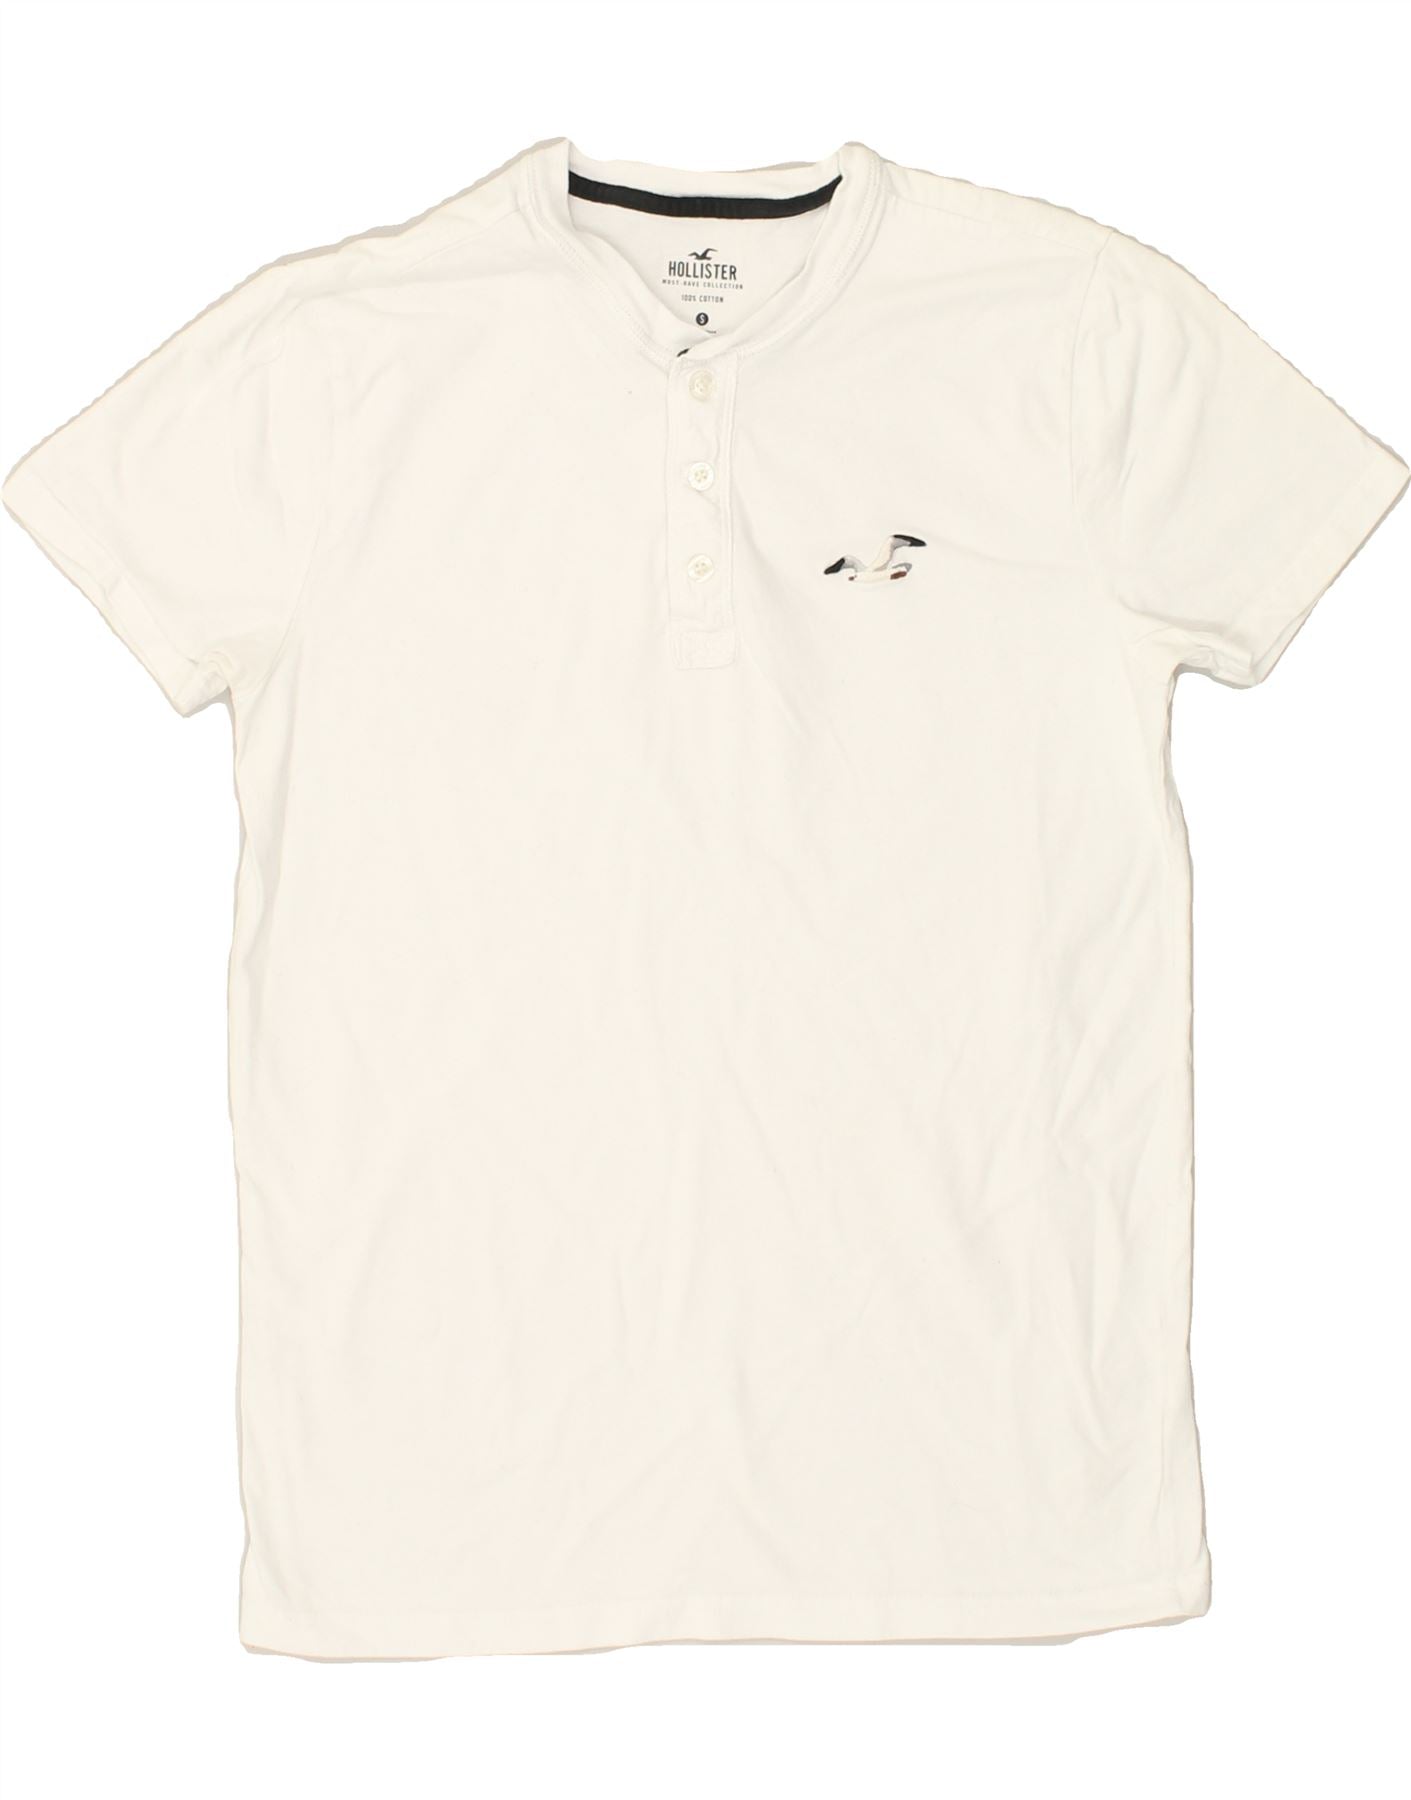 HOLLISTER Mens Henley T-Shirt Top Small White Cotton, Vintage &  Second-Hand Clothing Online